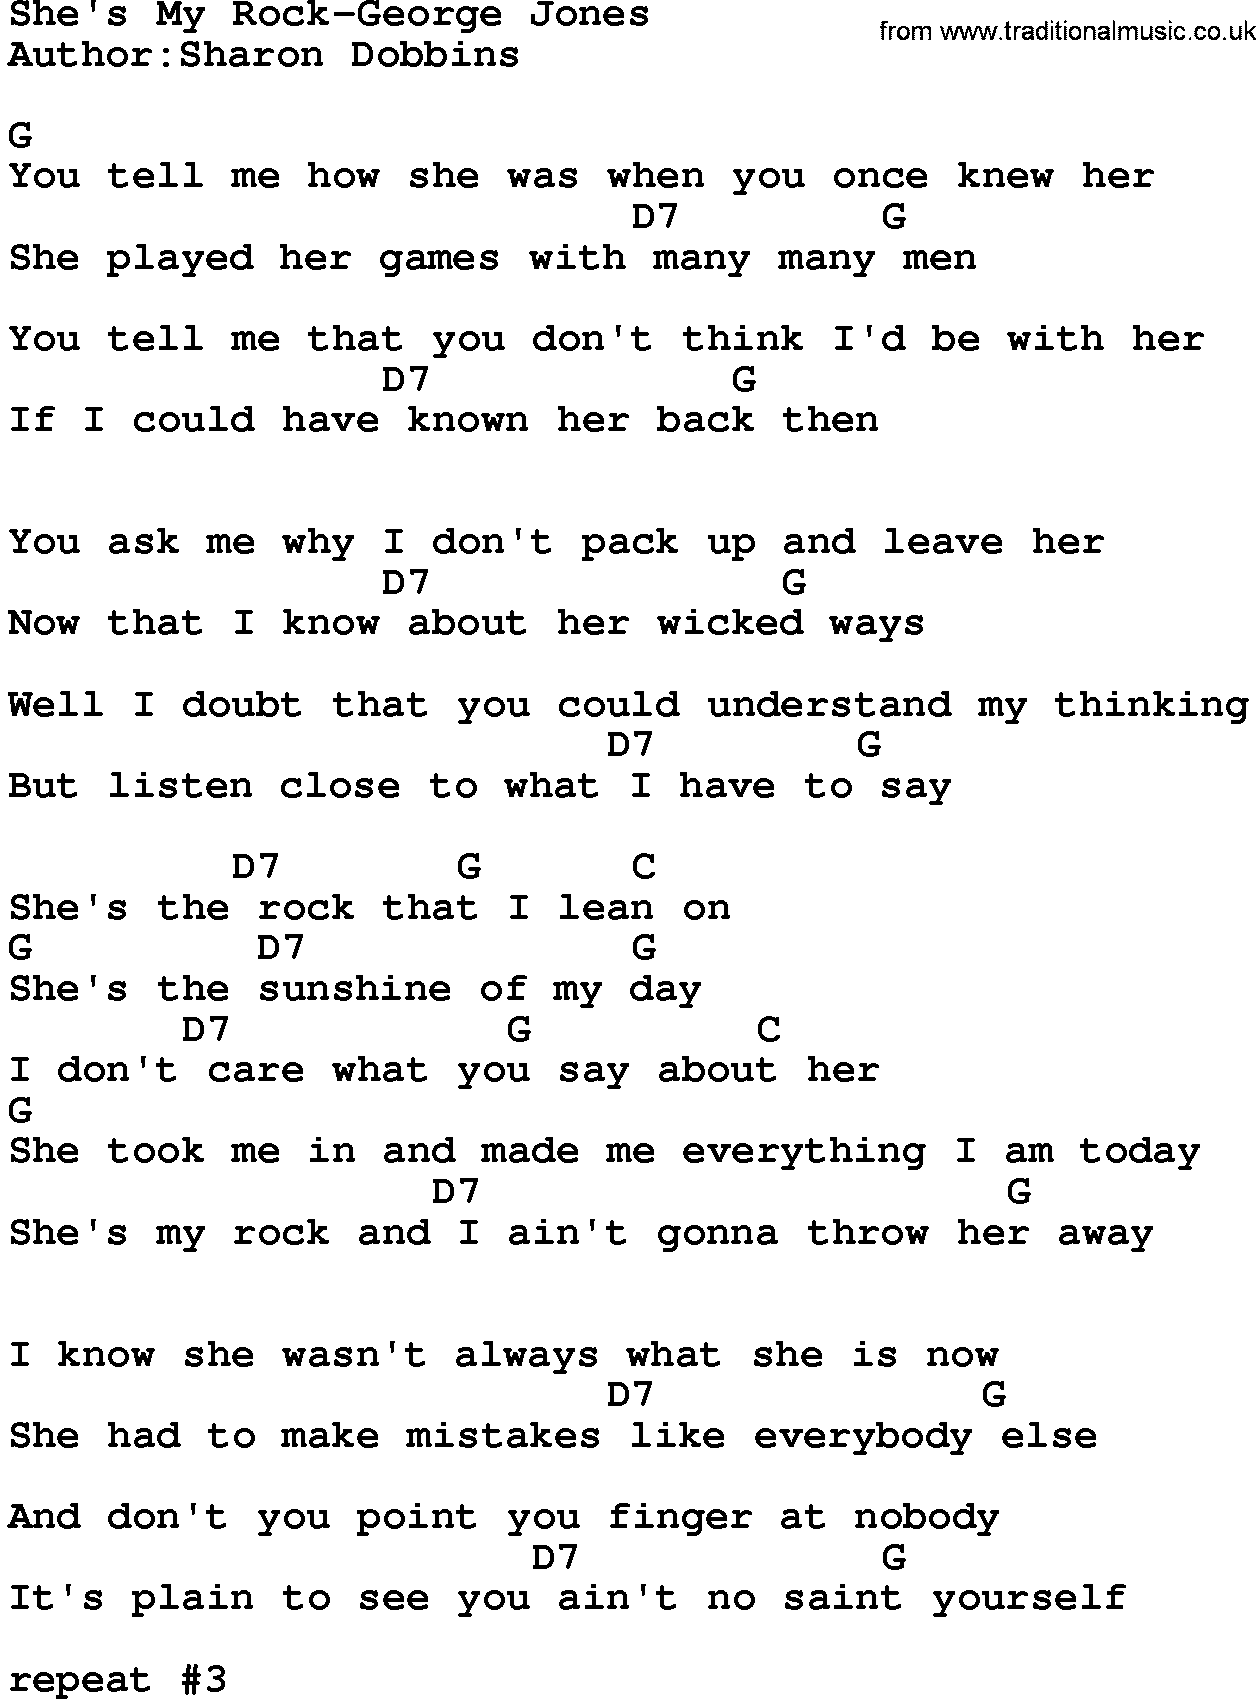 Country music song: She's My Rock-George Jones lyrics and chords